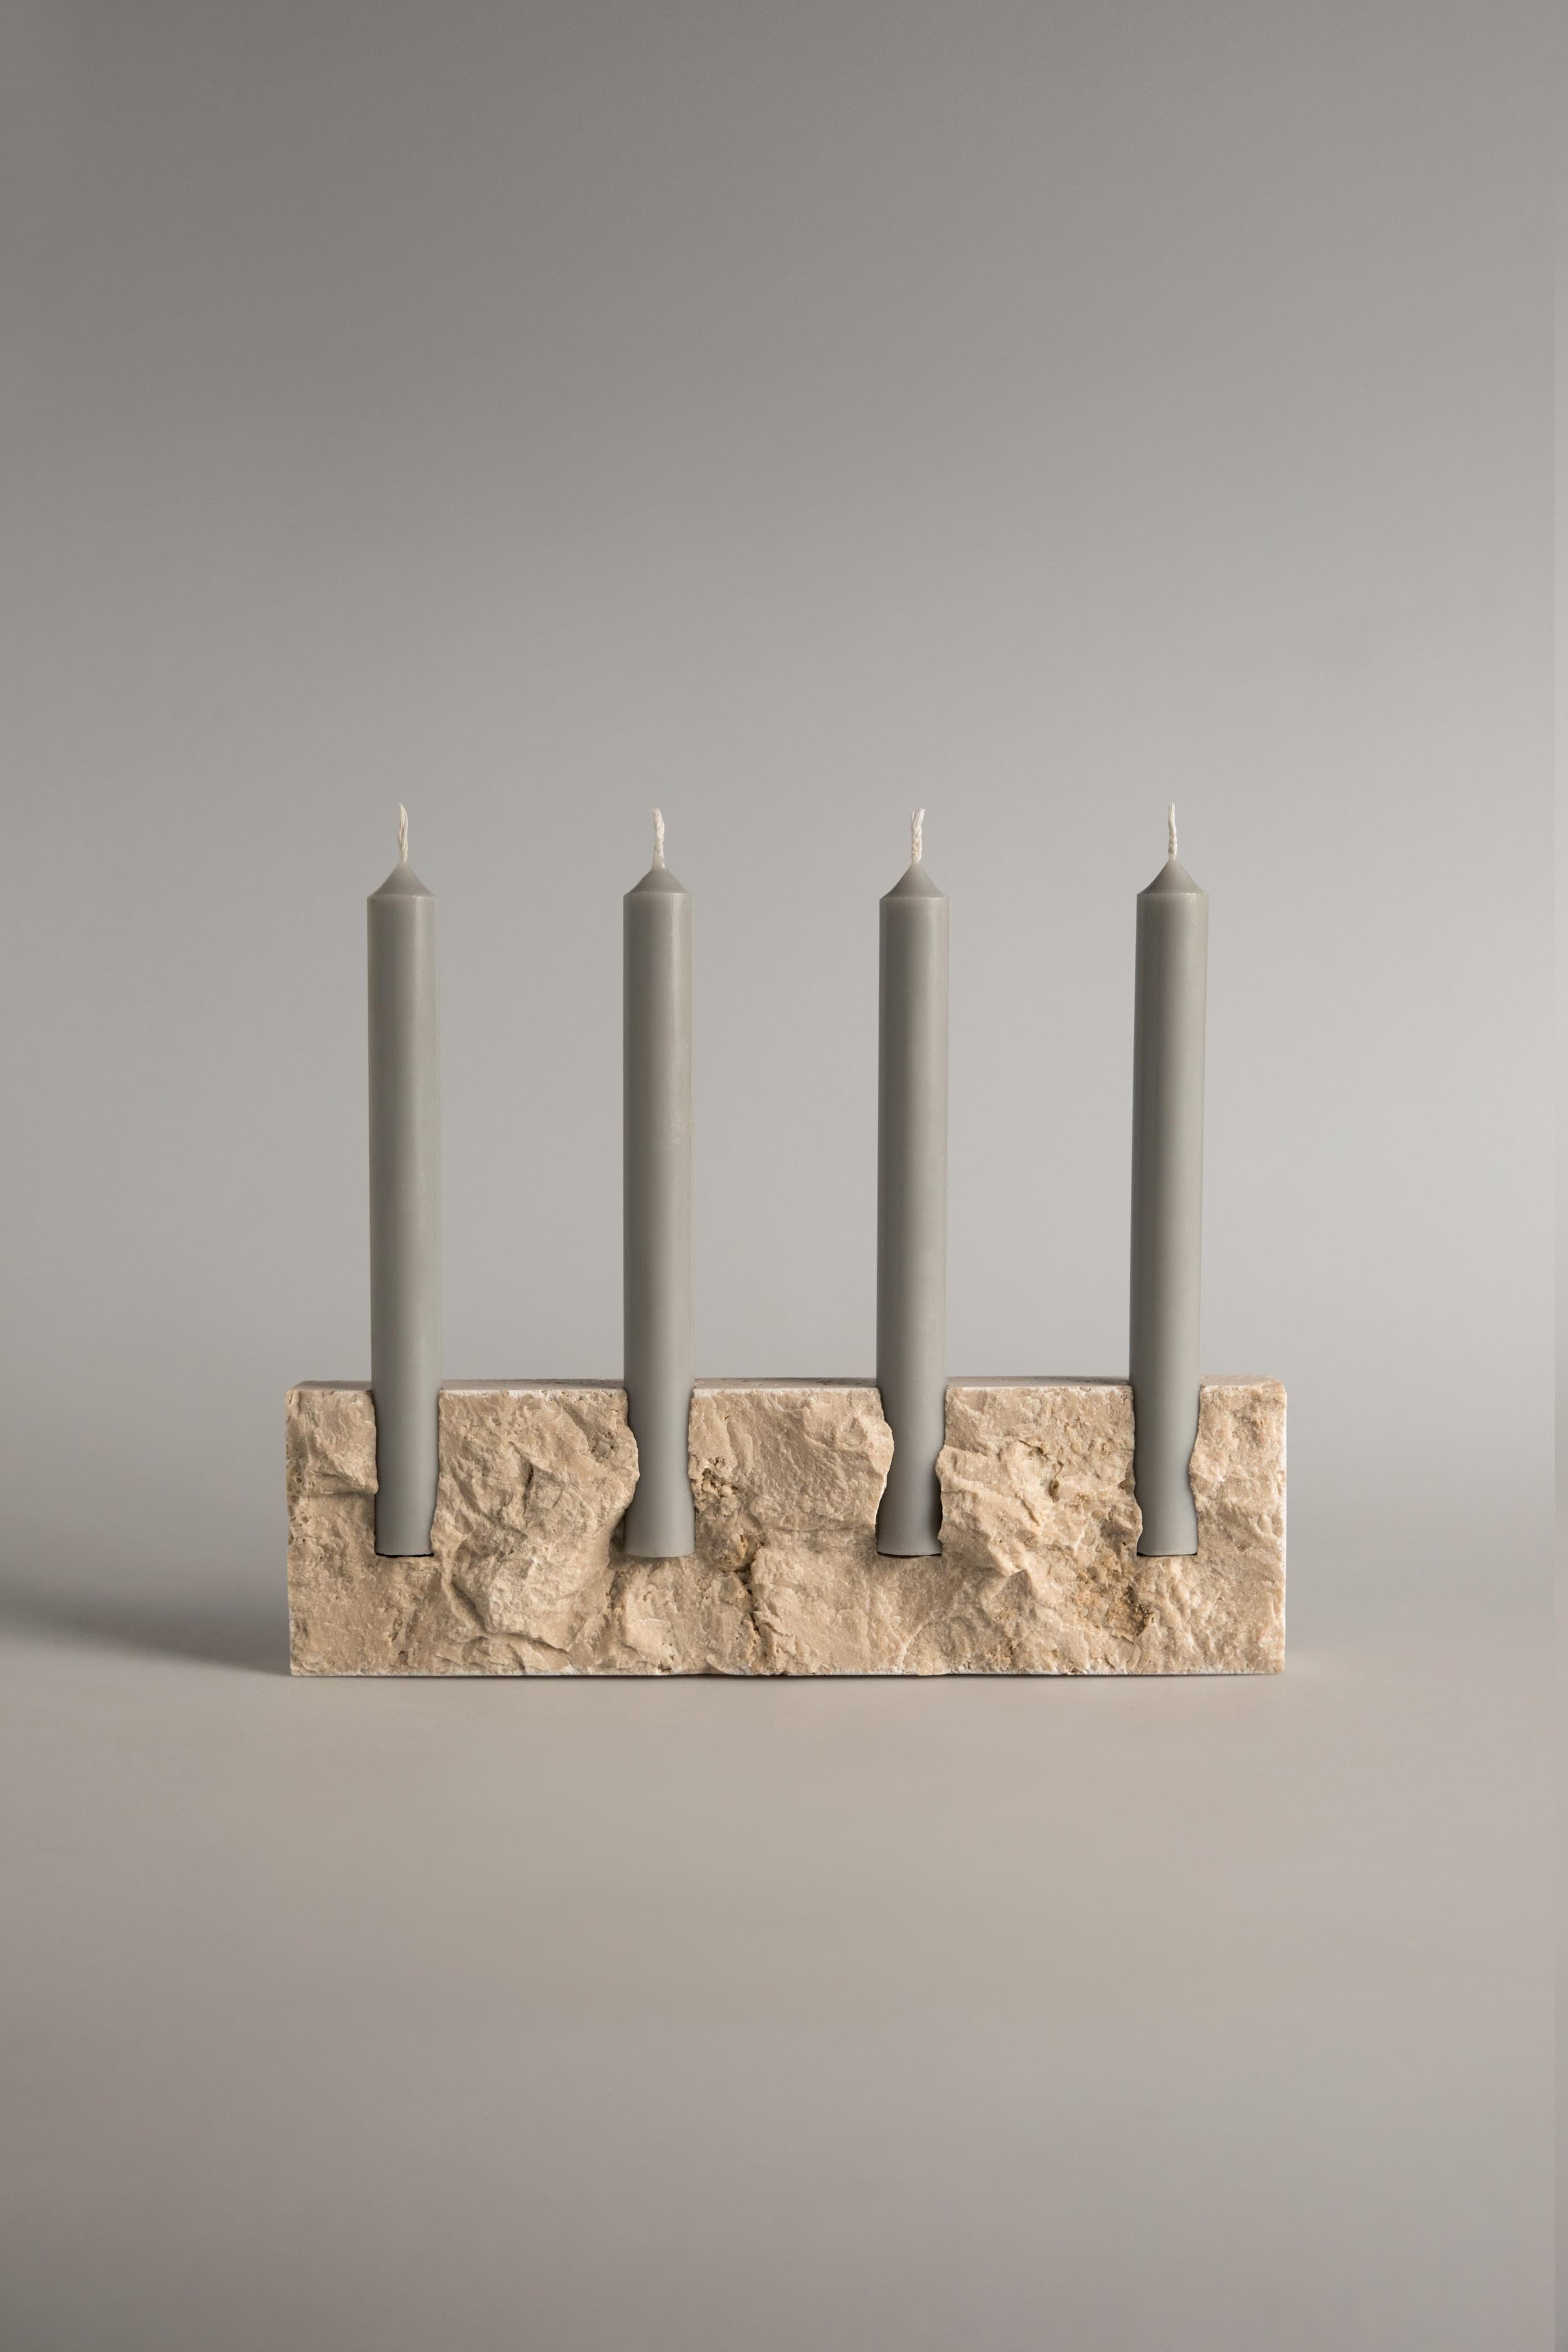 Handcrafted candle holder in bone-white travertine with rock face front (hand chipped) and smooth sides. Please note that each stone is unique and reacts differently, therefore important variations in colour, shape and texture occur. 

Snug candle